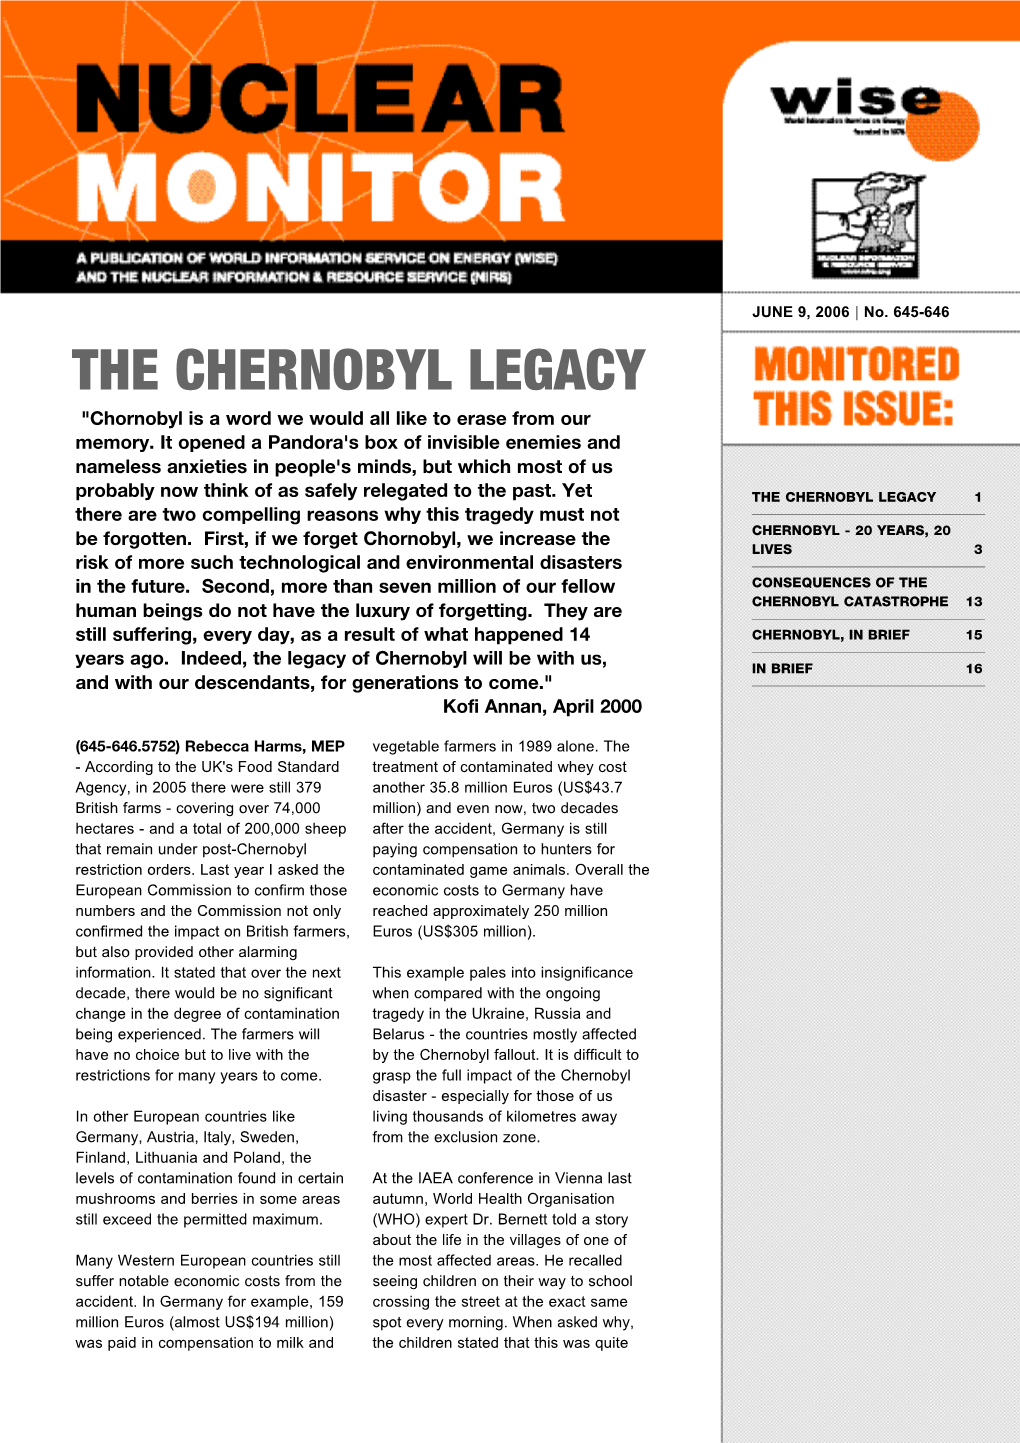 THE CHERNOBYL LEGACY "Chornobyl Is a Word We Would All Like to Erase from Our Memory